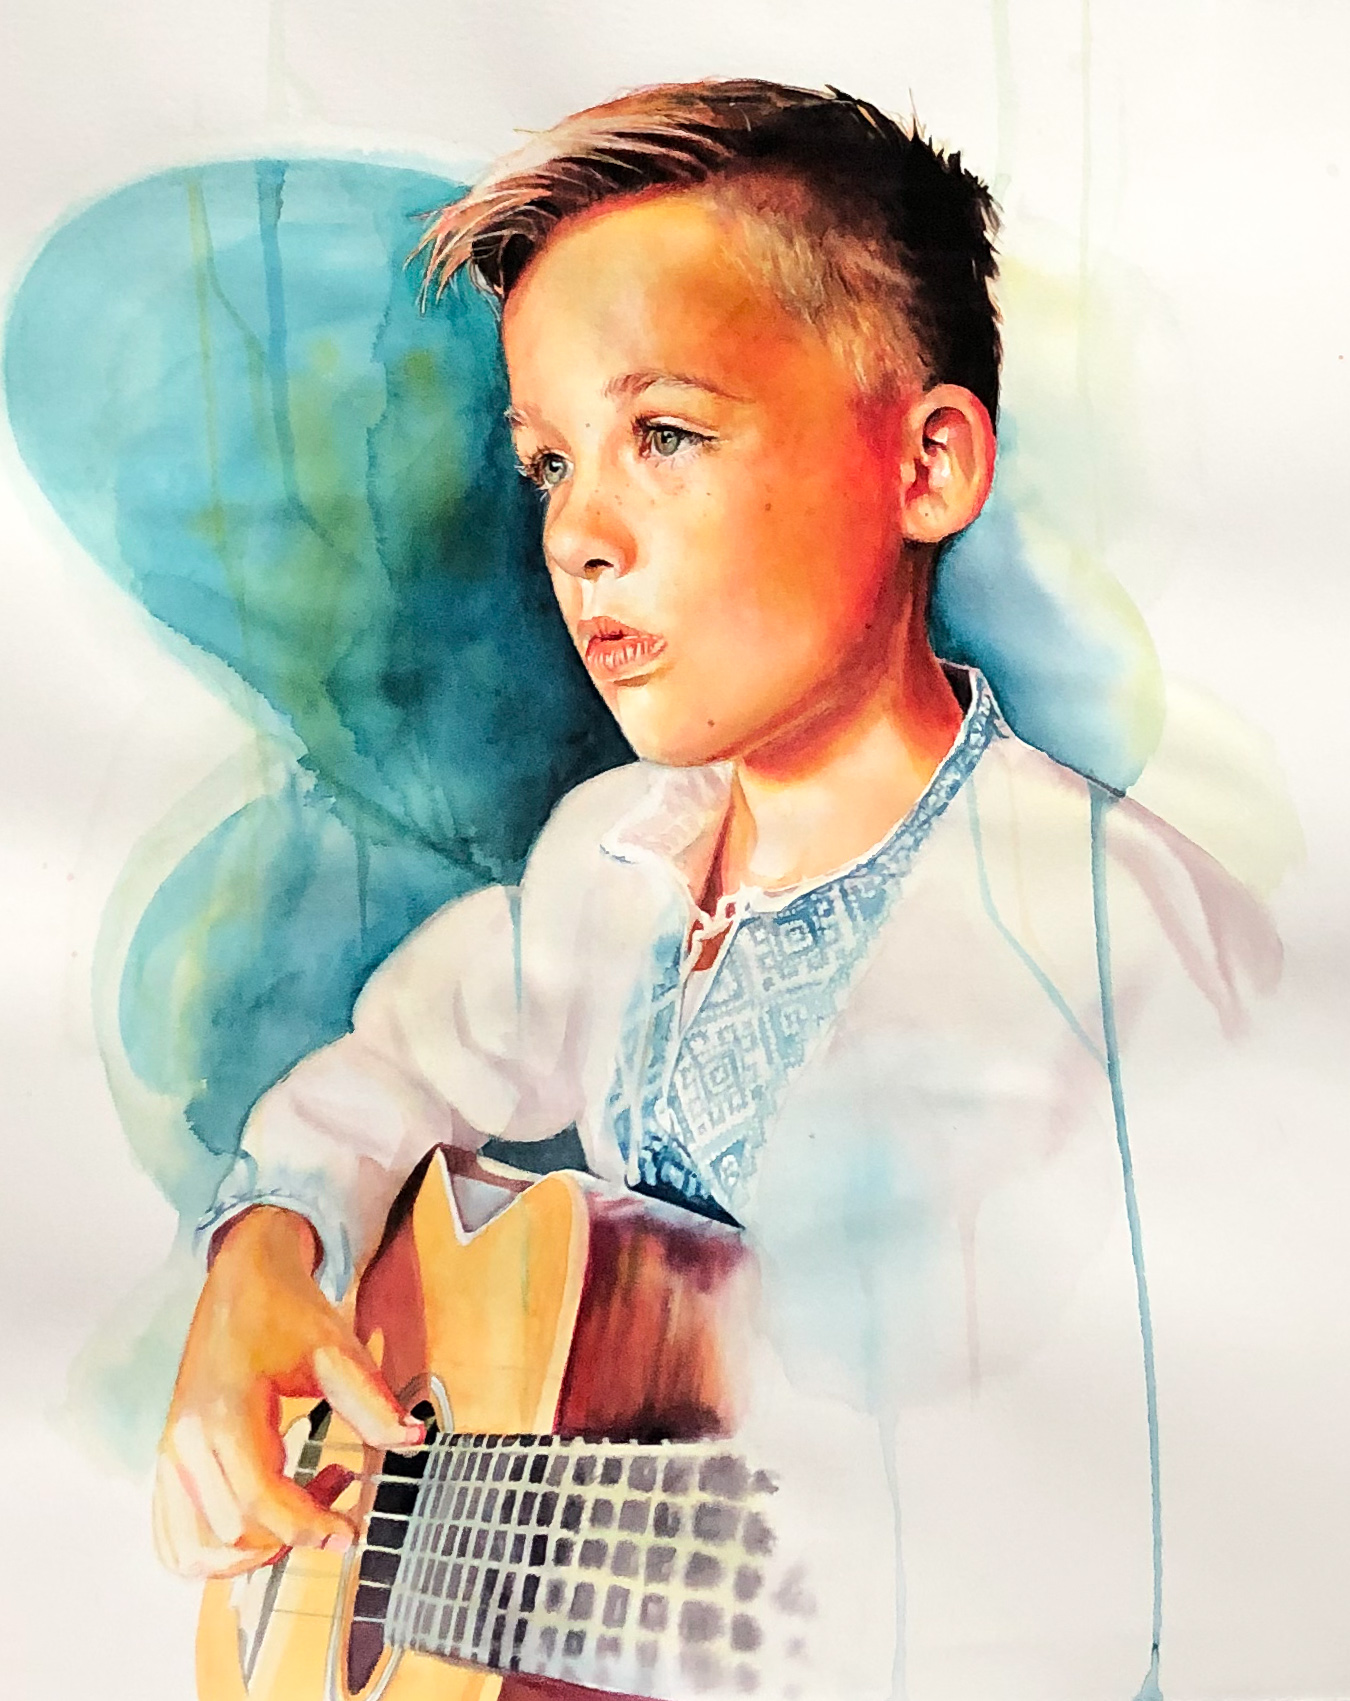 Watercolor painting of a boy playing guitar